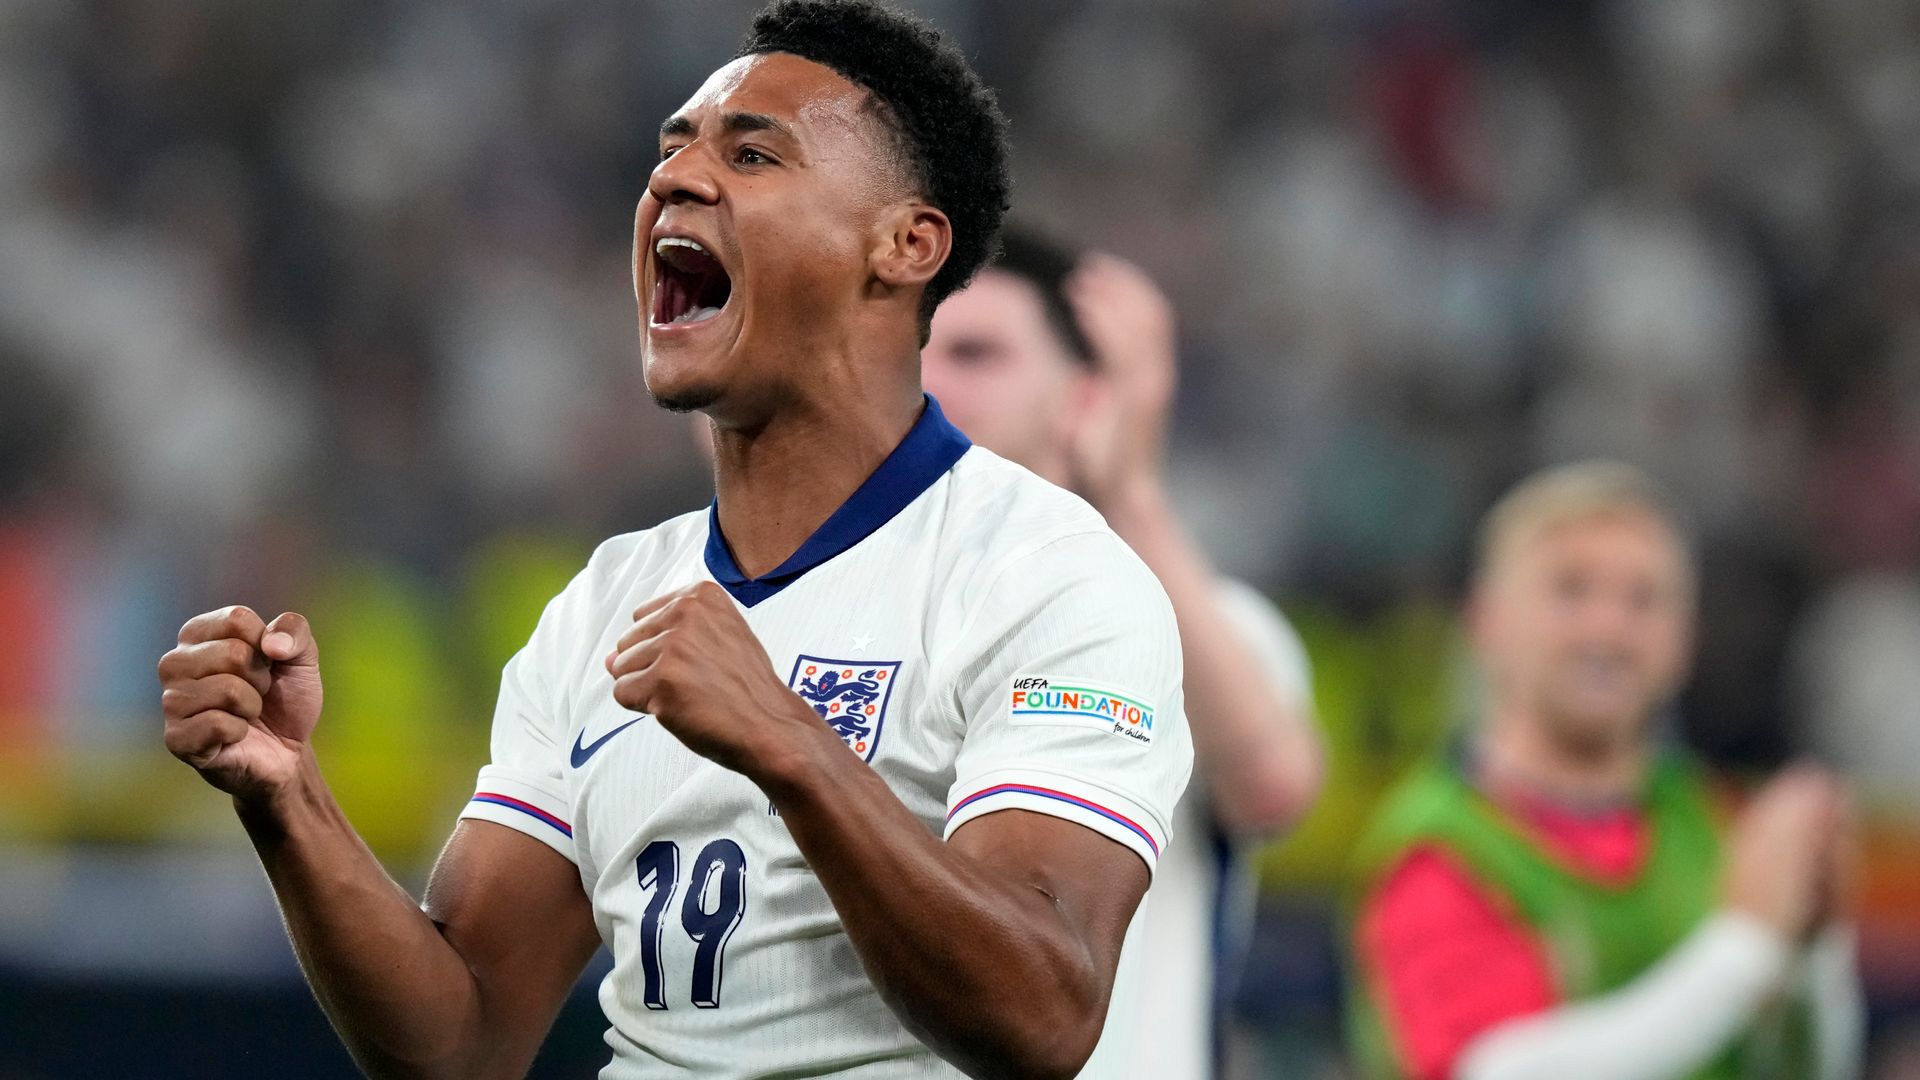 'I just wanted to soak it all in': From non-league football to England's hero - the rise of Ollie Watkins 